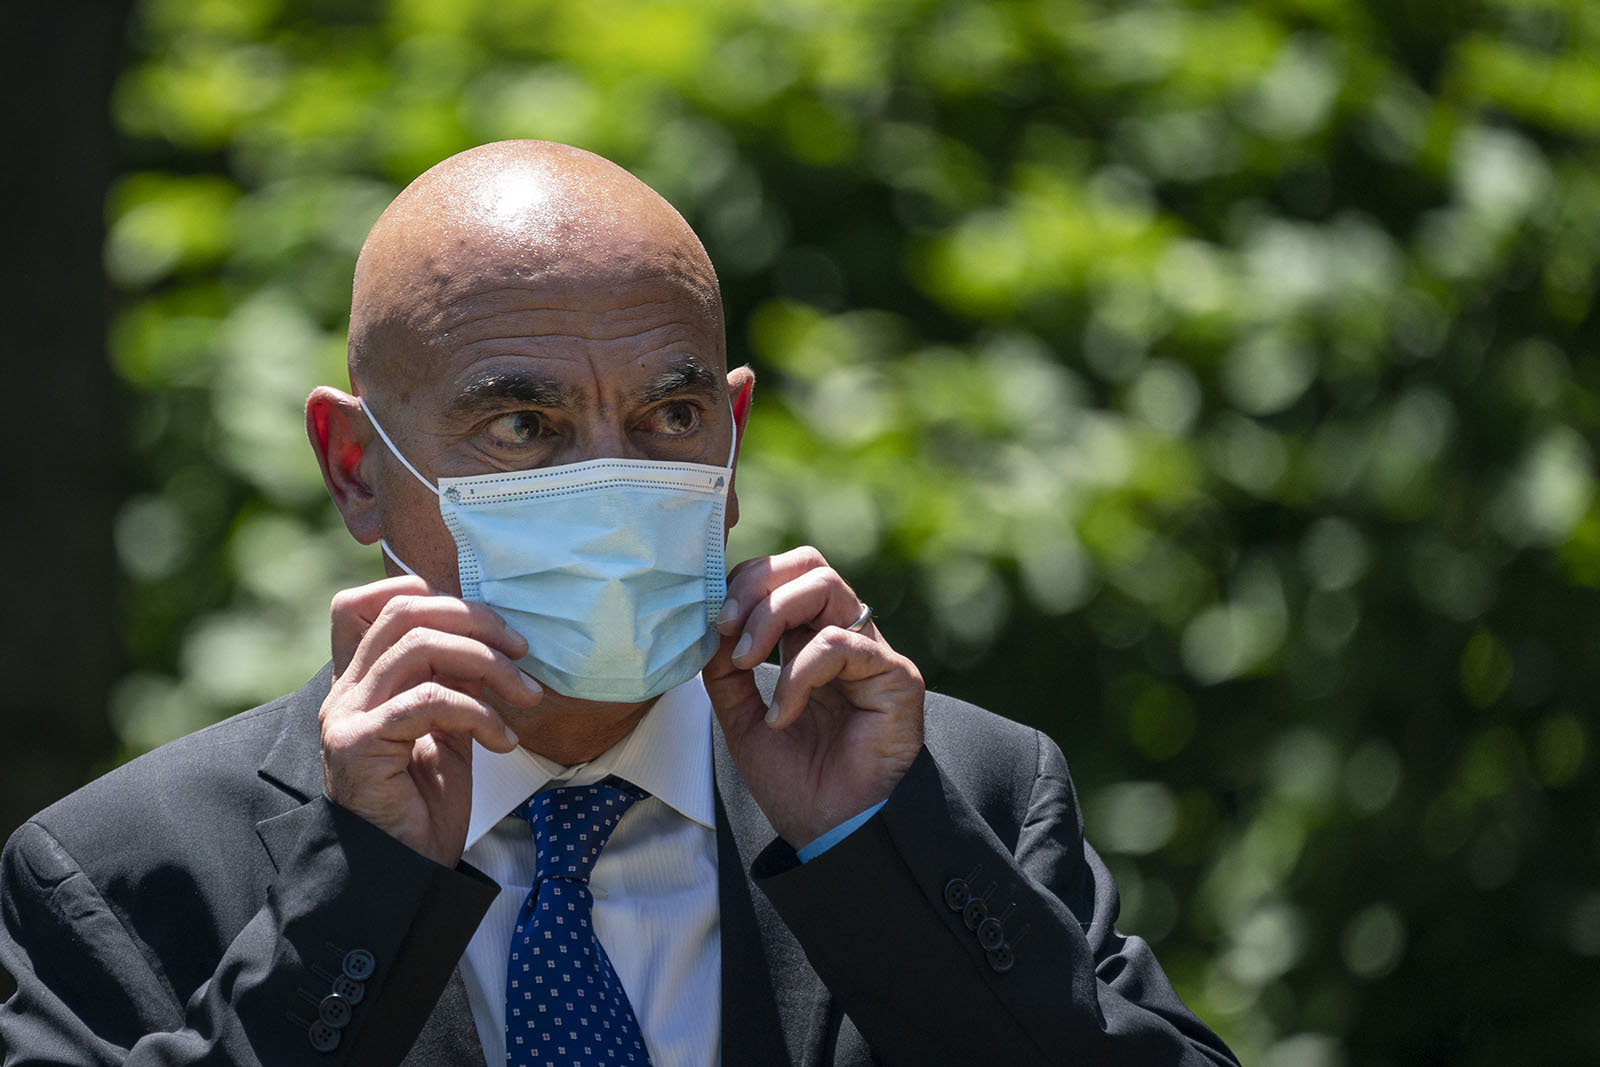 Moncef Slaoui, the former head of GlaxoSmithKlines vaccines division, listens as President Donald Trump delivers remarks about coronavirus vaccine development in the Rose Garden of the White House on May 15 in Washington.